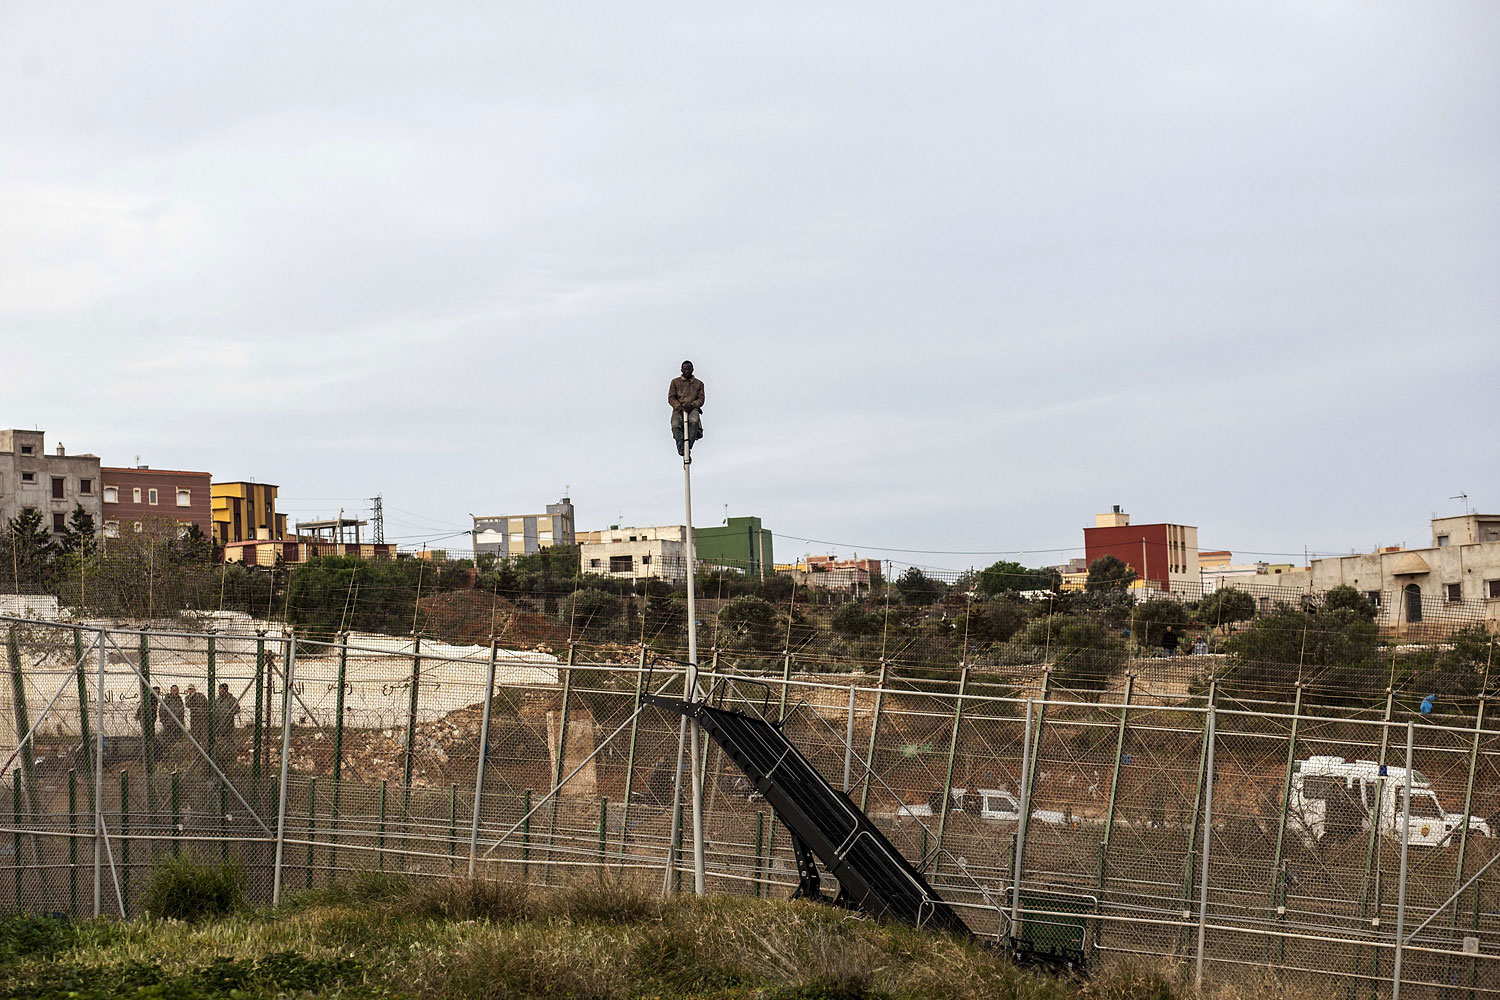 A would-be immigrant waits sitted on a mast on the other side of fences near Beni Enza, into the north African Spanish enclave of Melilla on March 28, 2014.